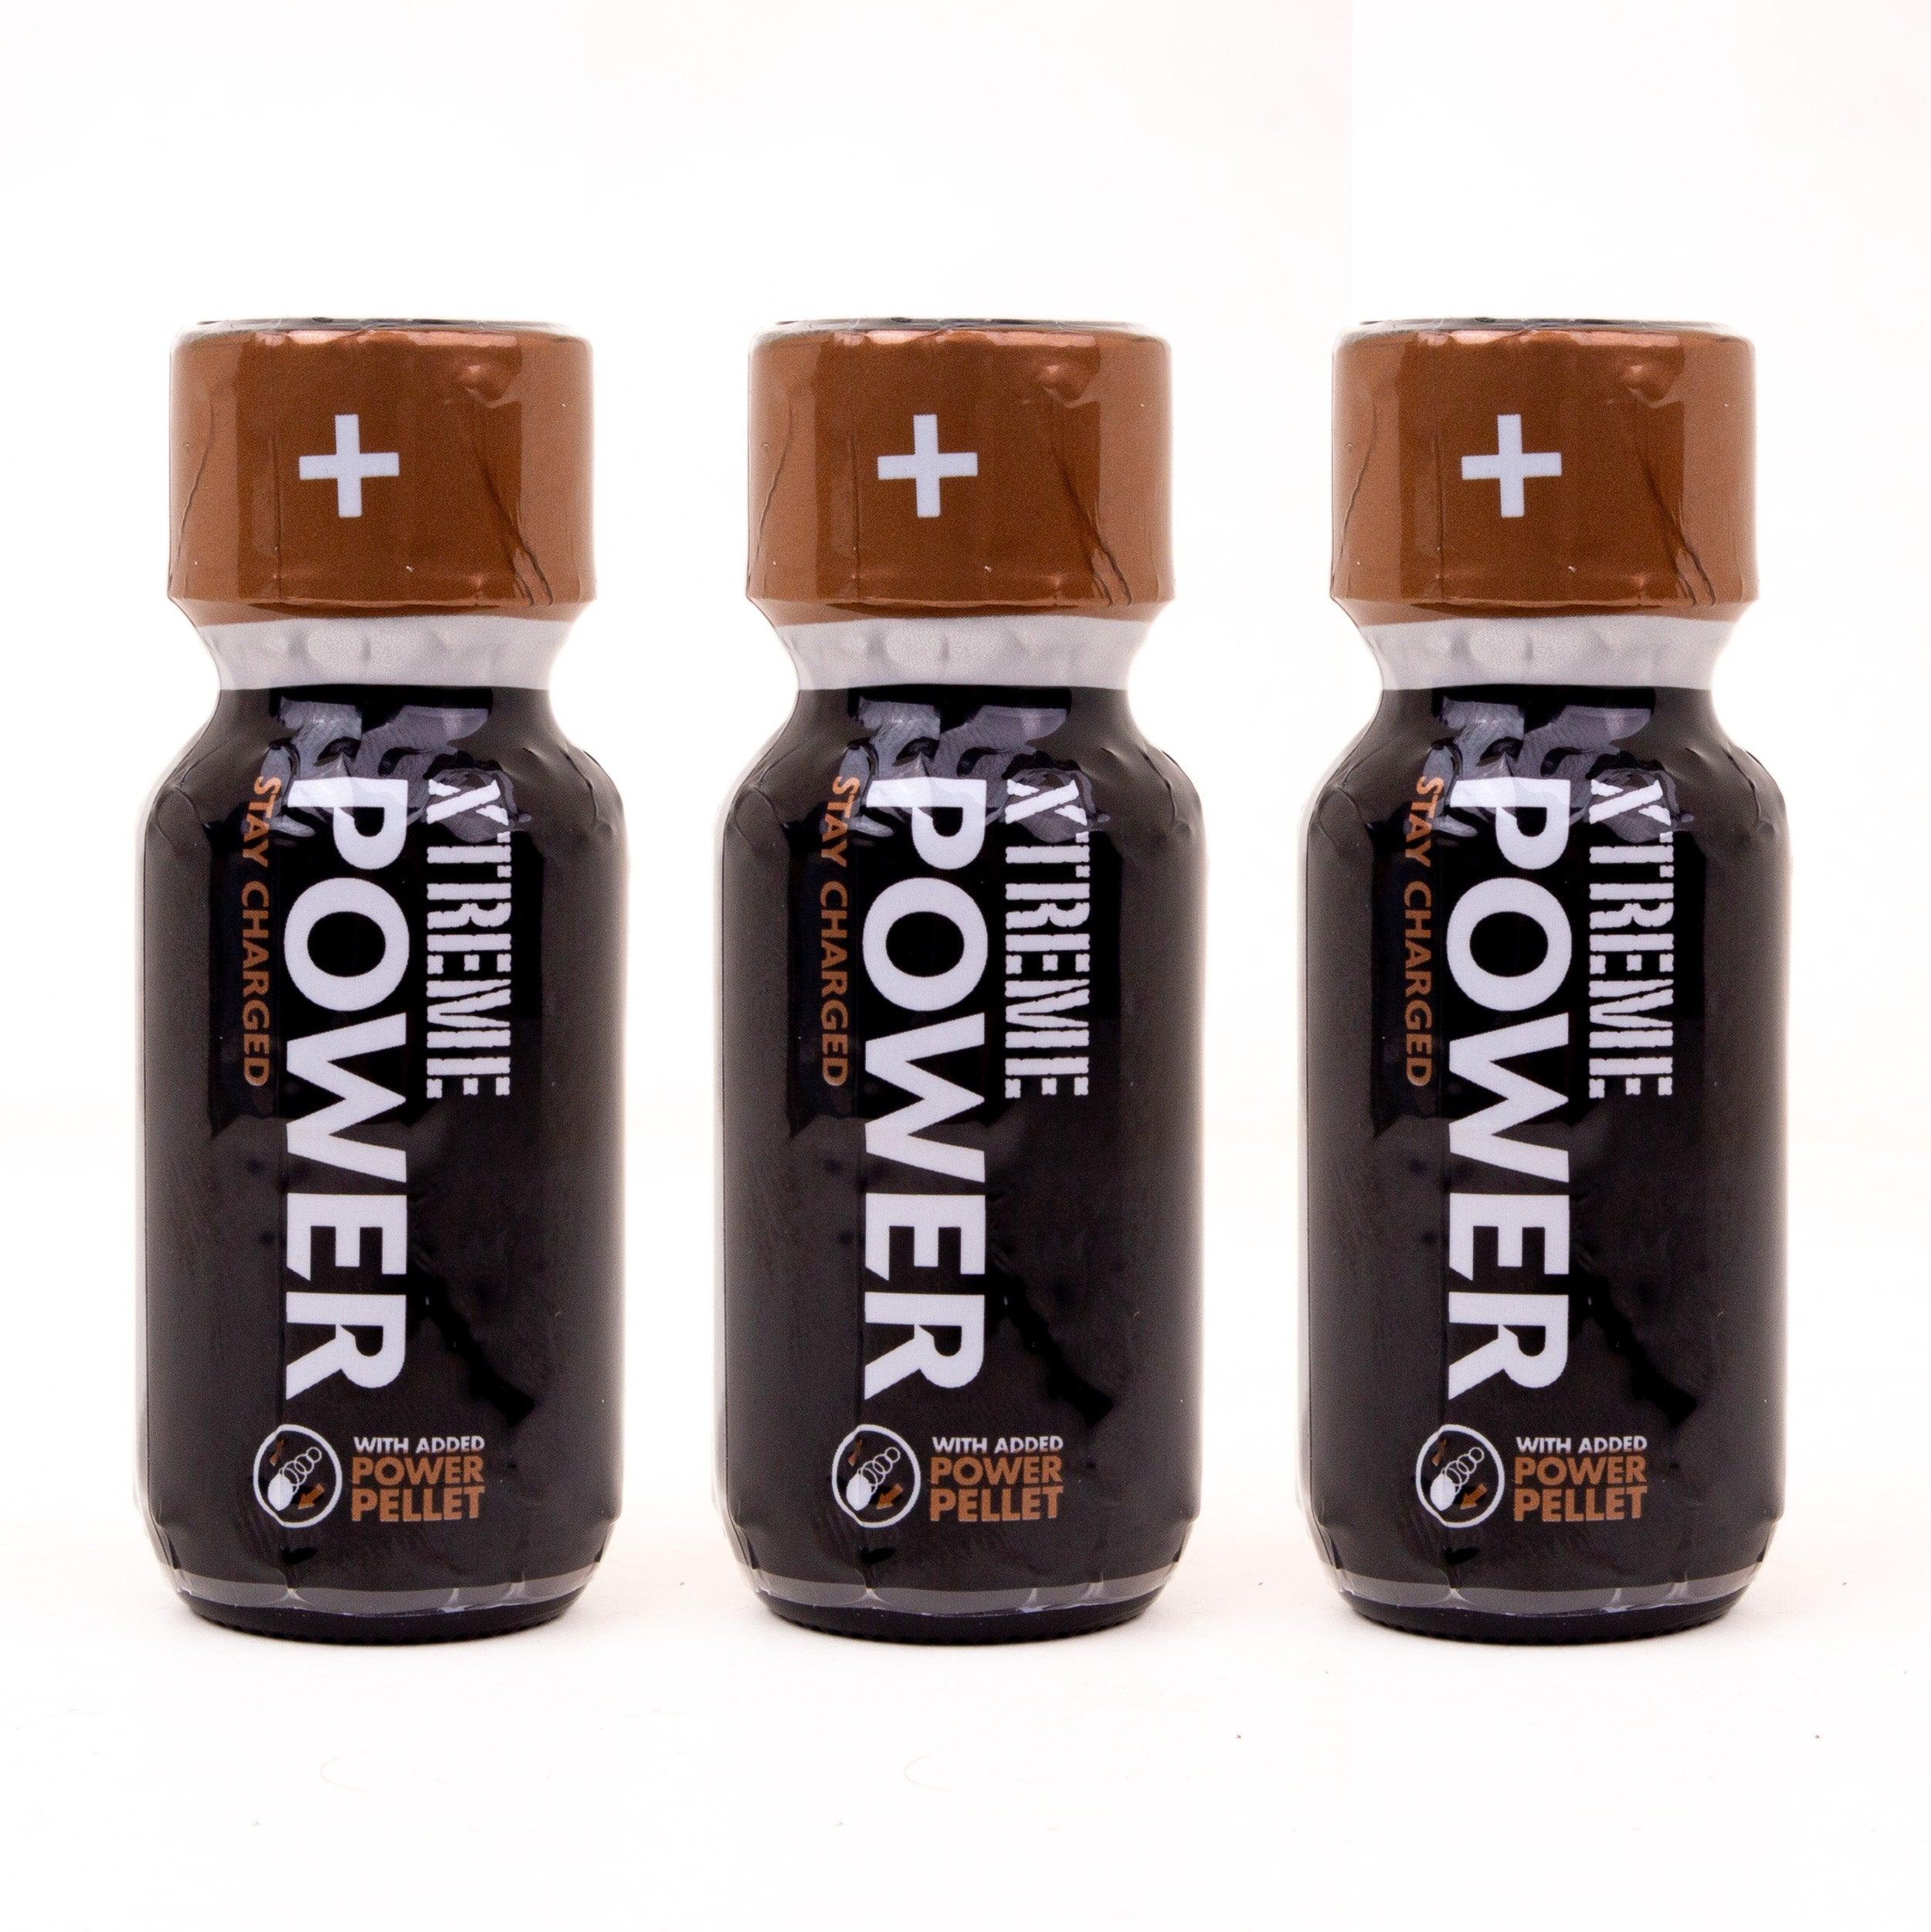 Xtreme Power + Power Pellet, 22ml, 3-Pack by Xtreme